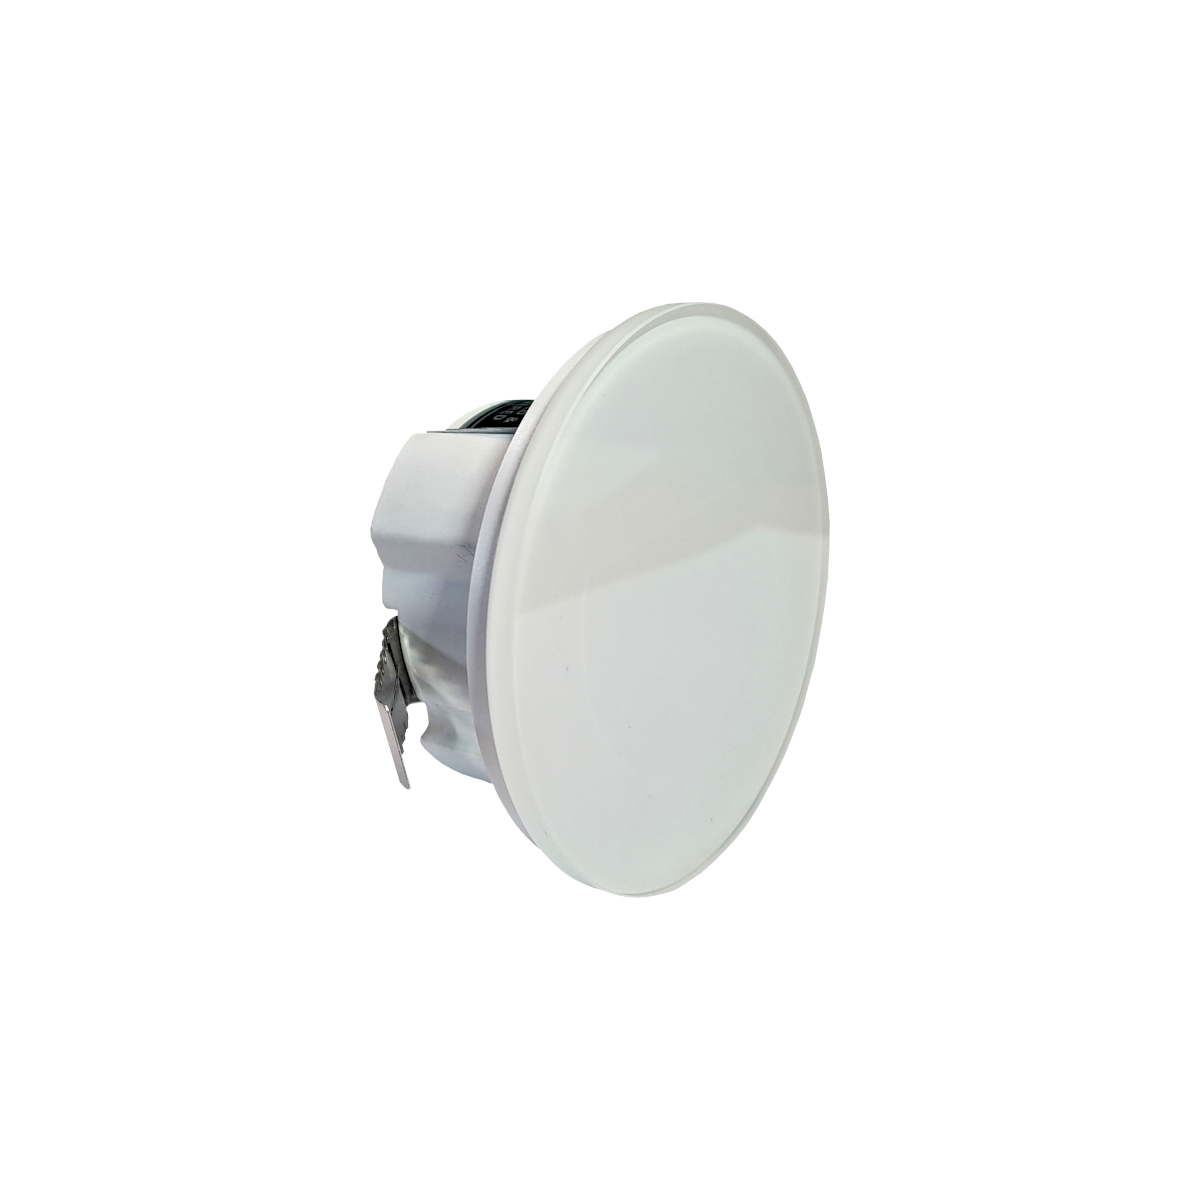 Escalier Glass Round LED Stairlight